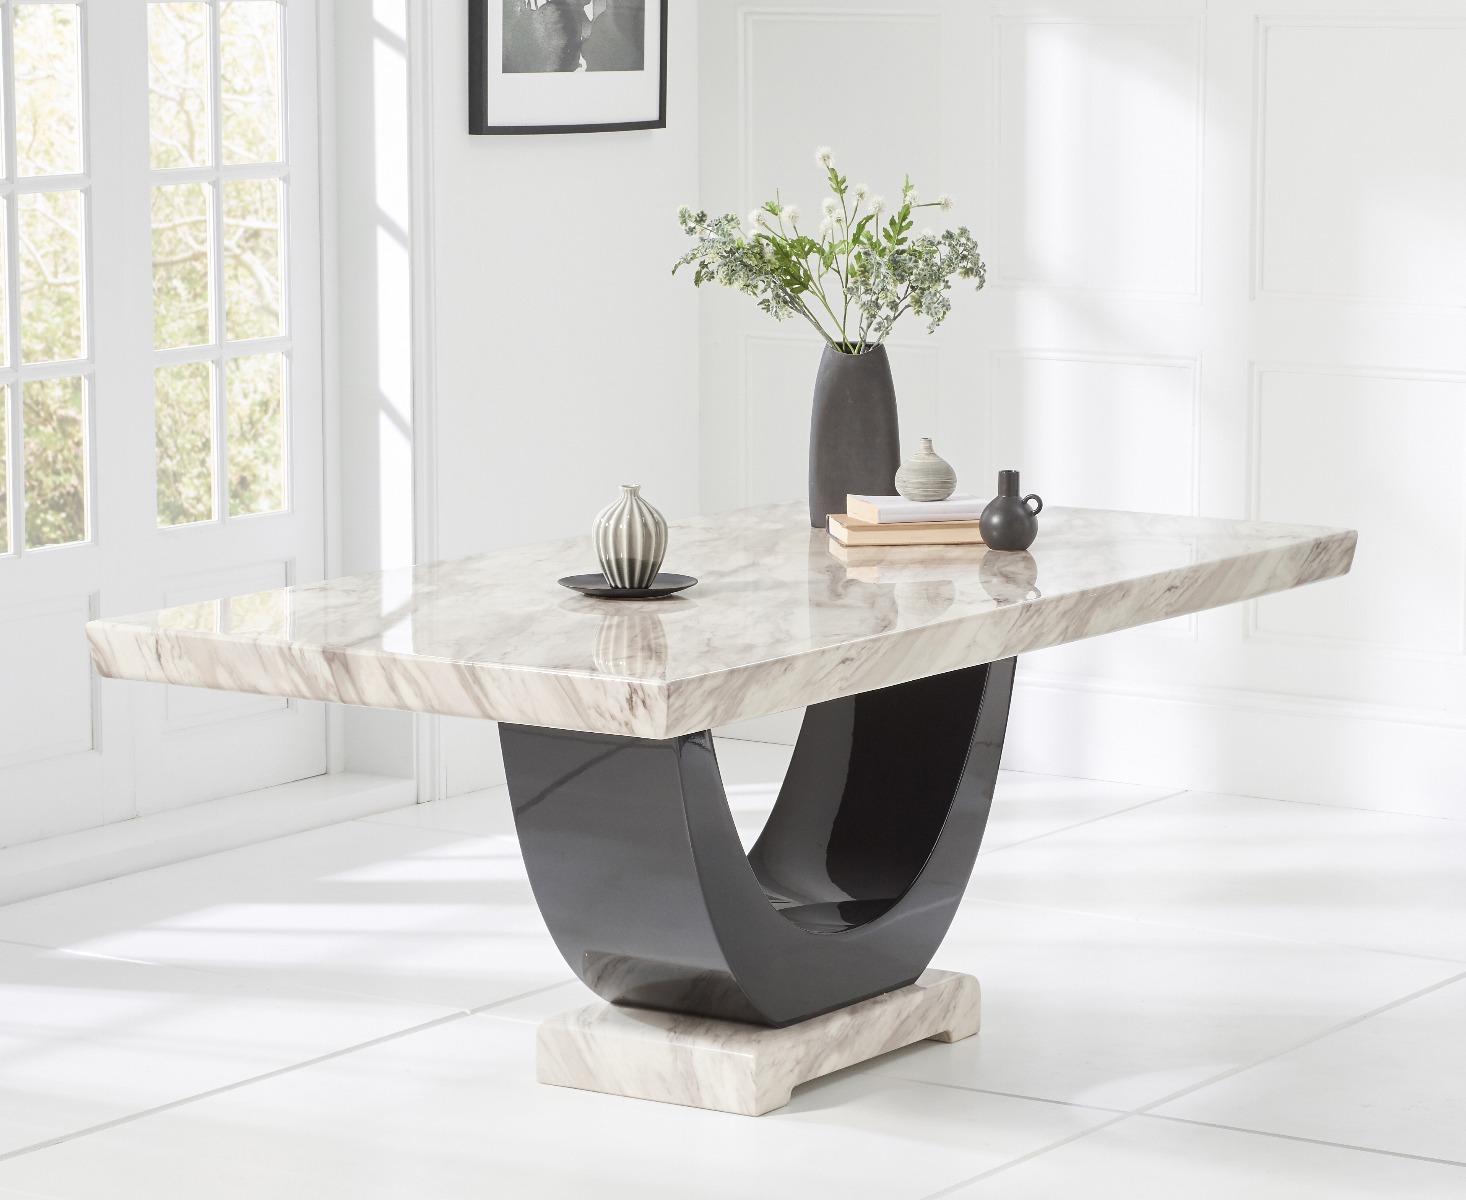 Photo 1 of Novara 200cm cream and black pedestal marble dining table with 6 brown novara chairs